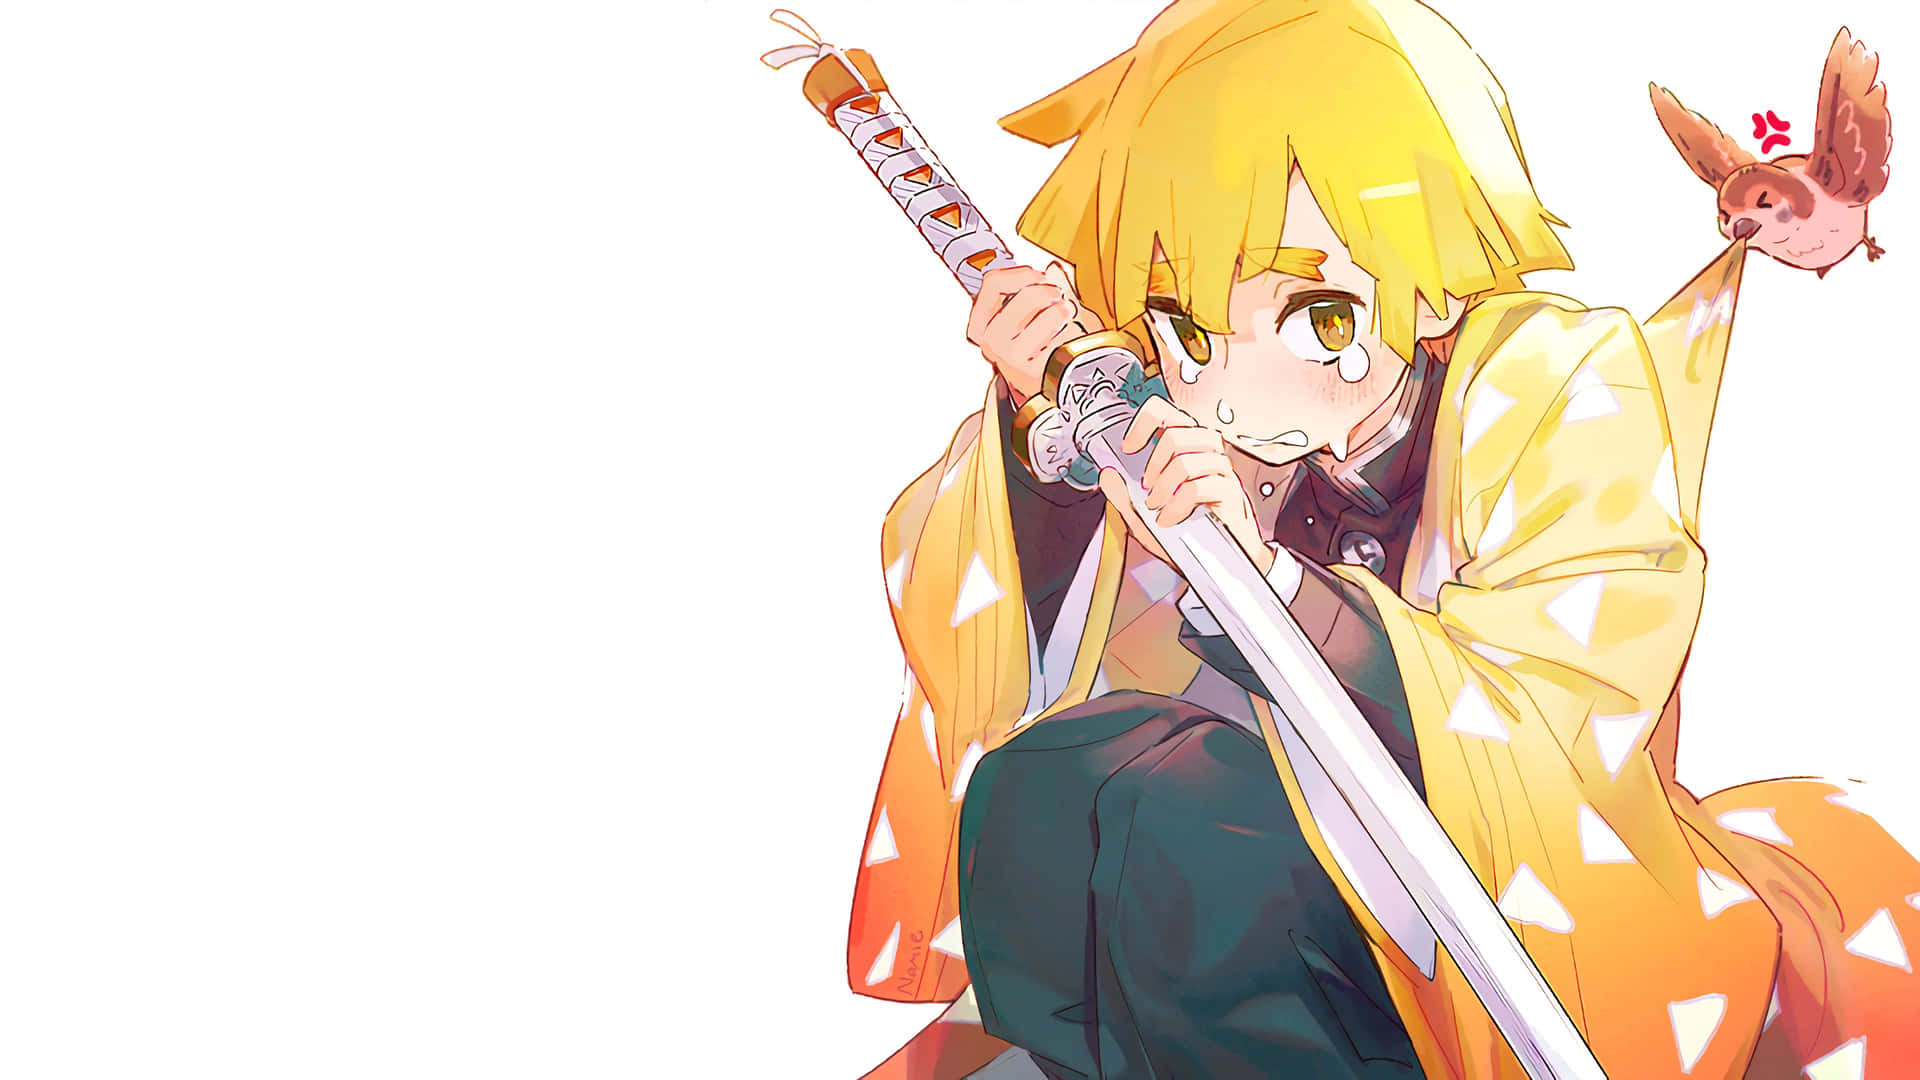 A Girl In A Yellow Robe Holding A Sword